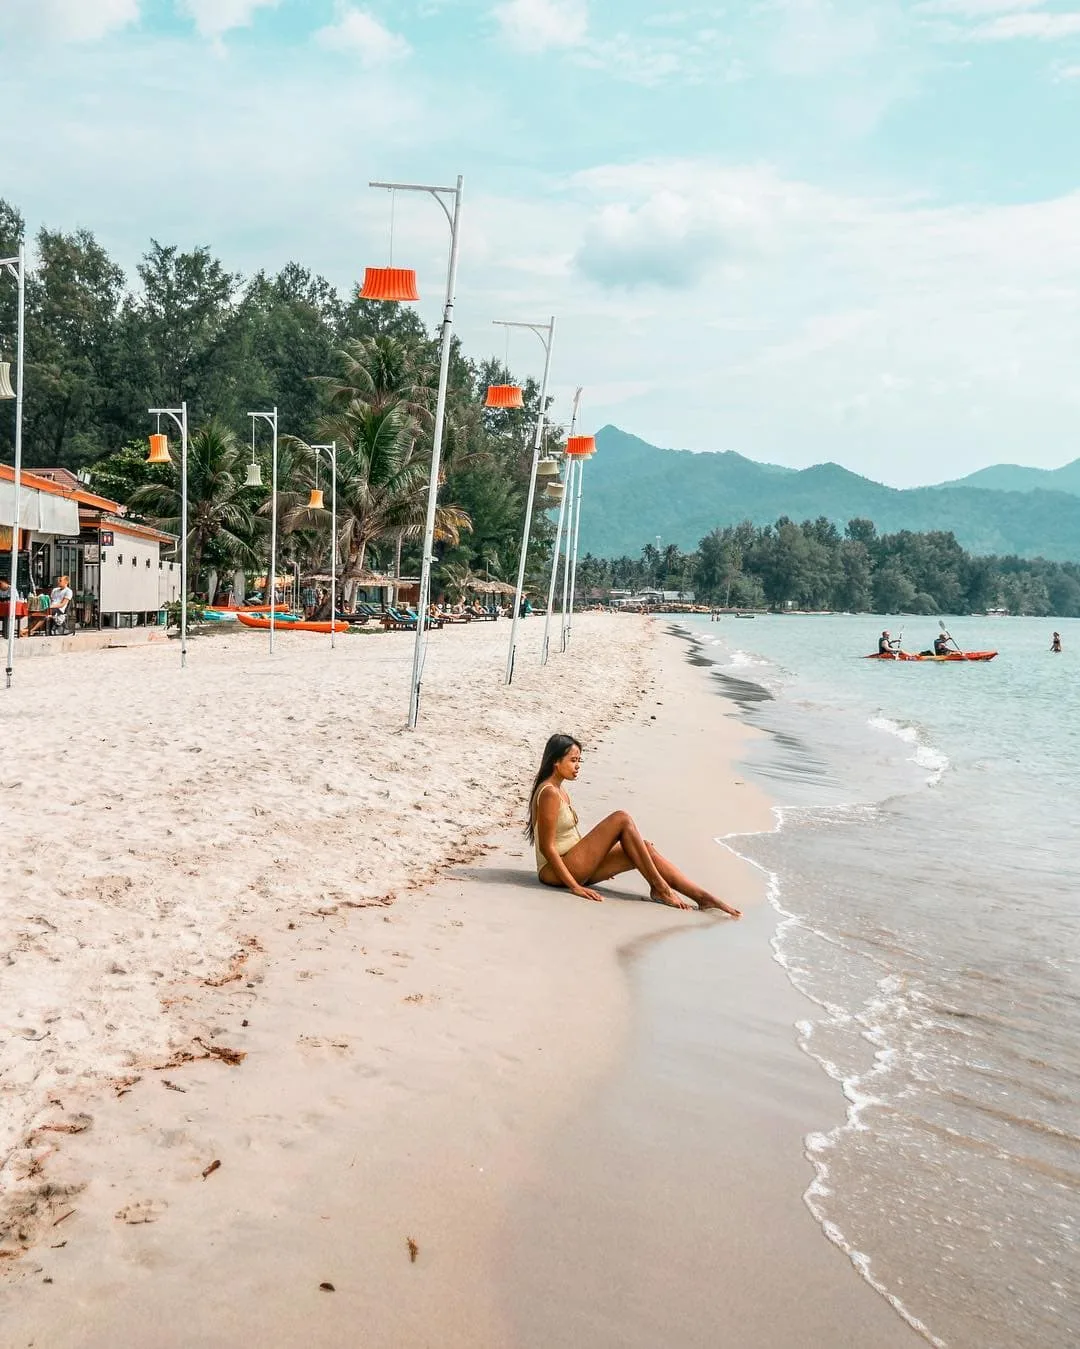 things to do in koh chang, where to stay in koh chang, how to get to koh chang, where to eat in koh chang